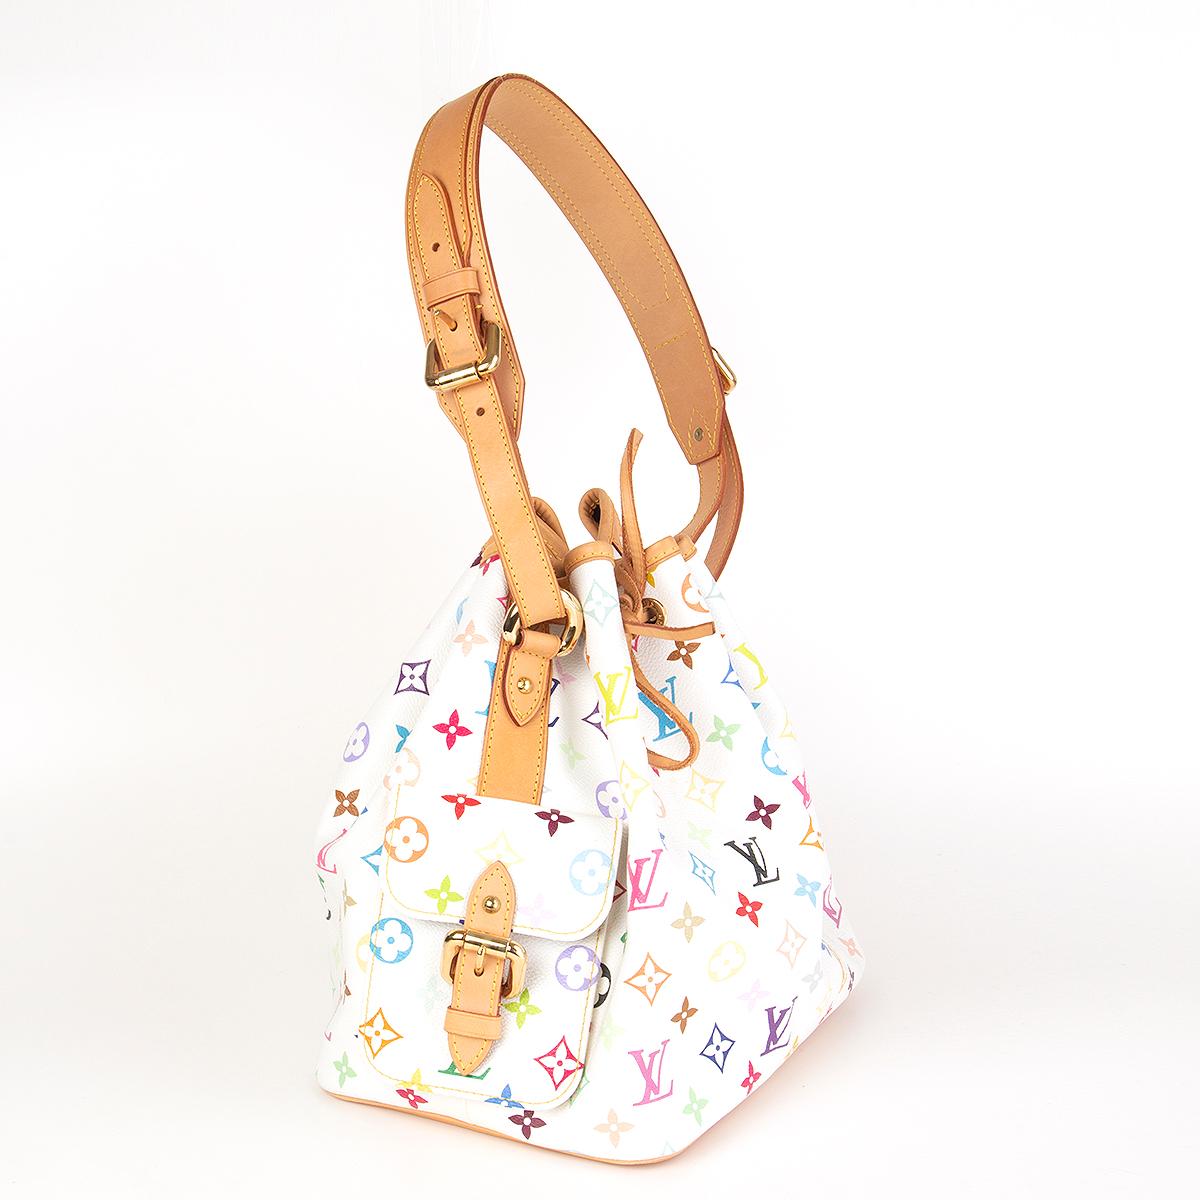 Louis Vuitton 'Petite Noé' bucket bag in white Monogram Multicolore canvas featuring Vachetta leather trimming and gold-tone hardware. Limited edition in collaboration with artiks Takashi Murakami. Opens with a drawstring on top and is lined in